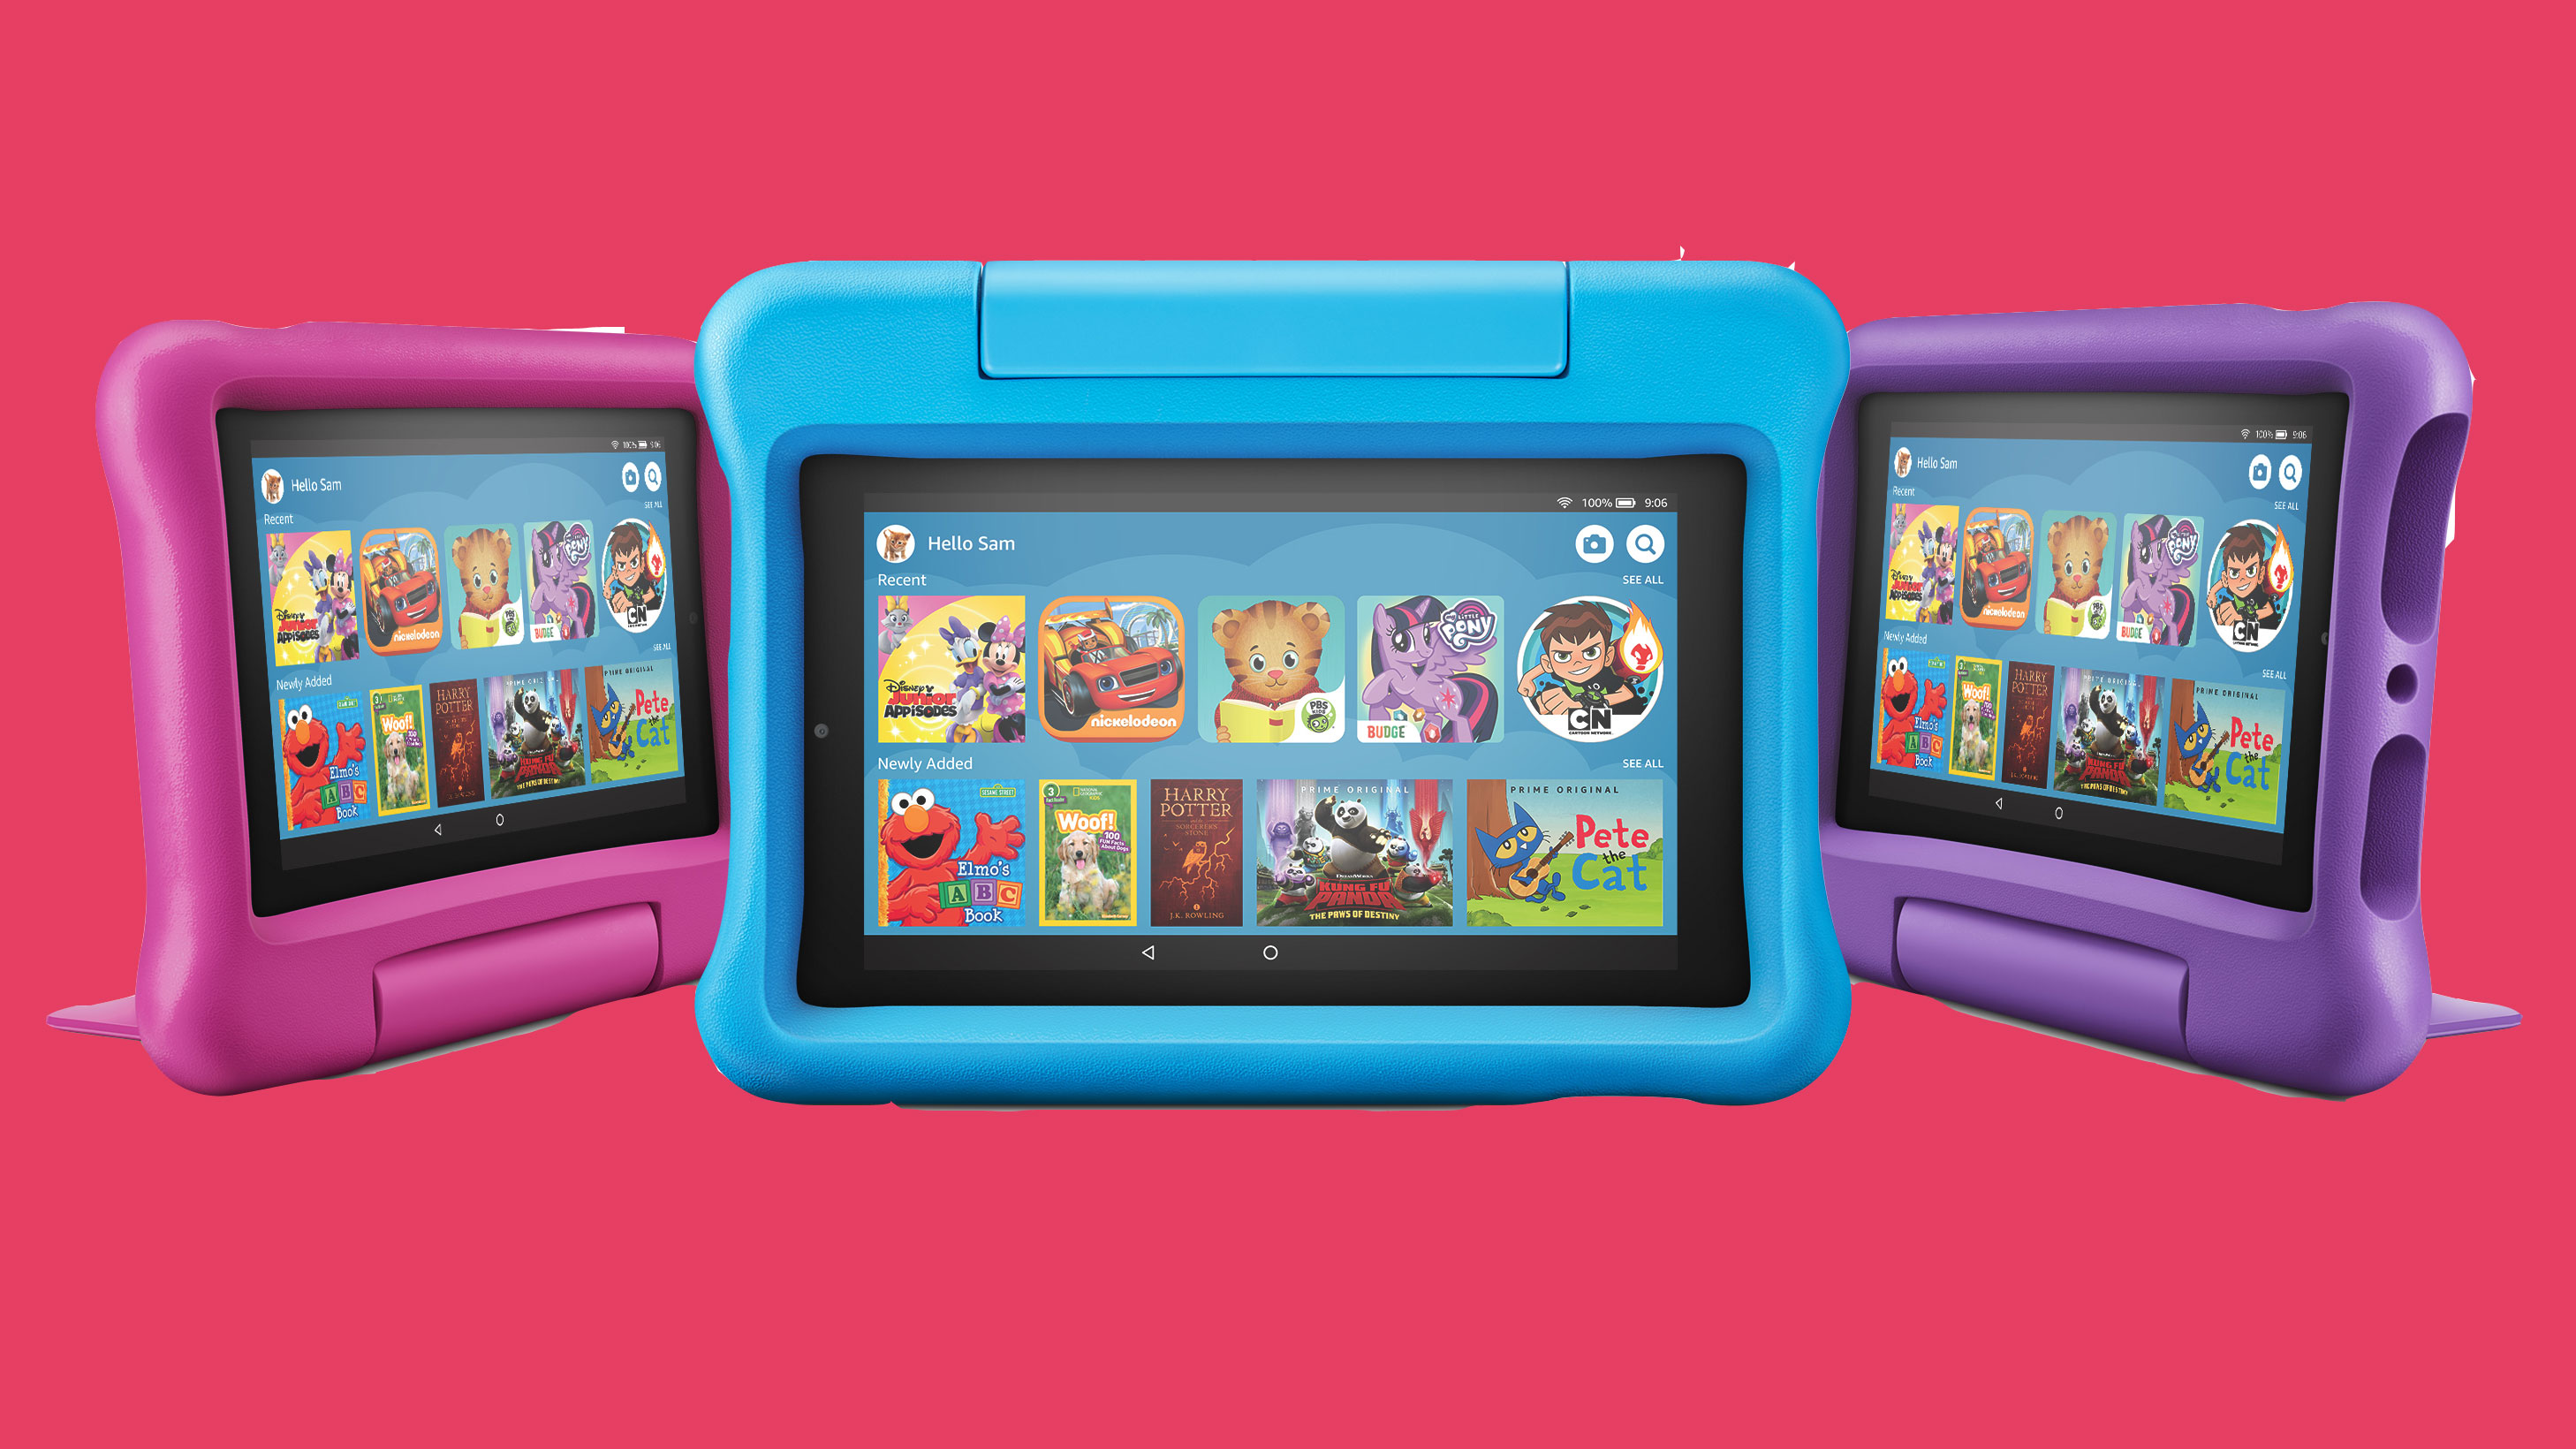 Fire HD 10 Kids tablet, ages 3-7. Top-selling 10 kids